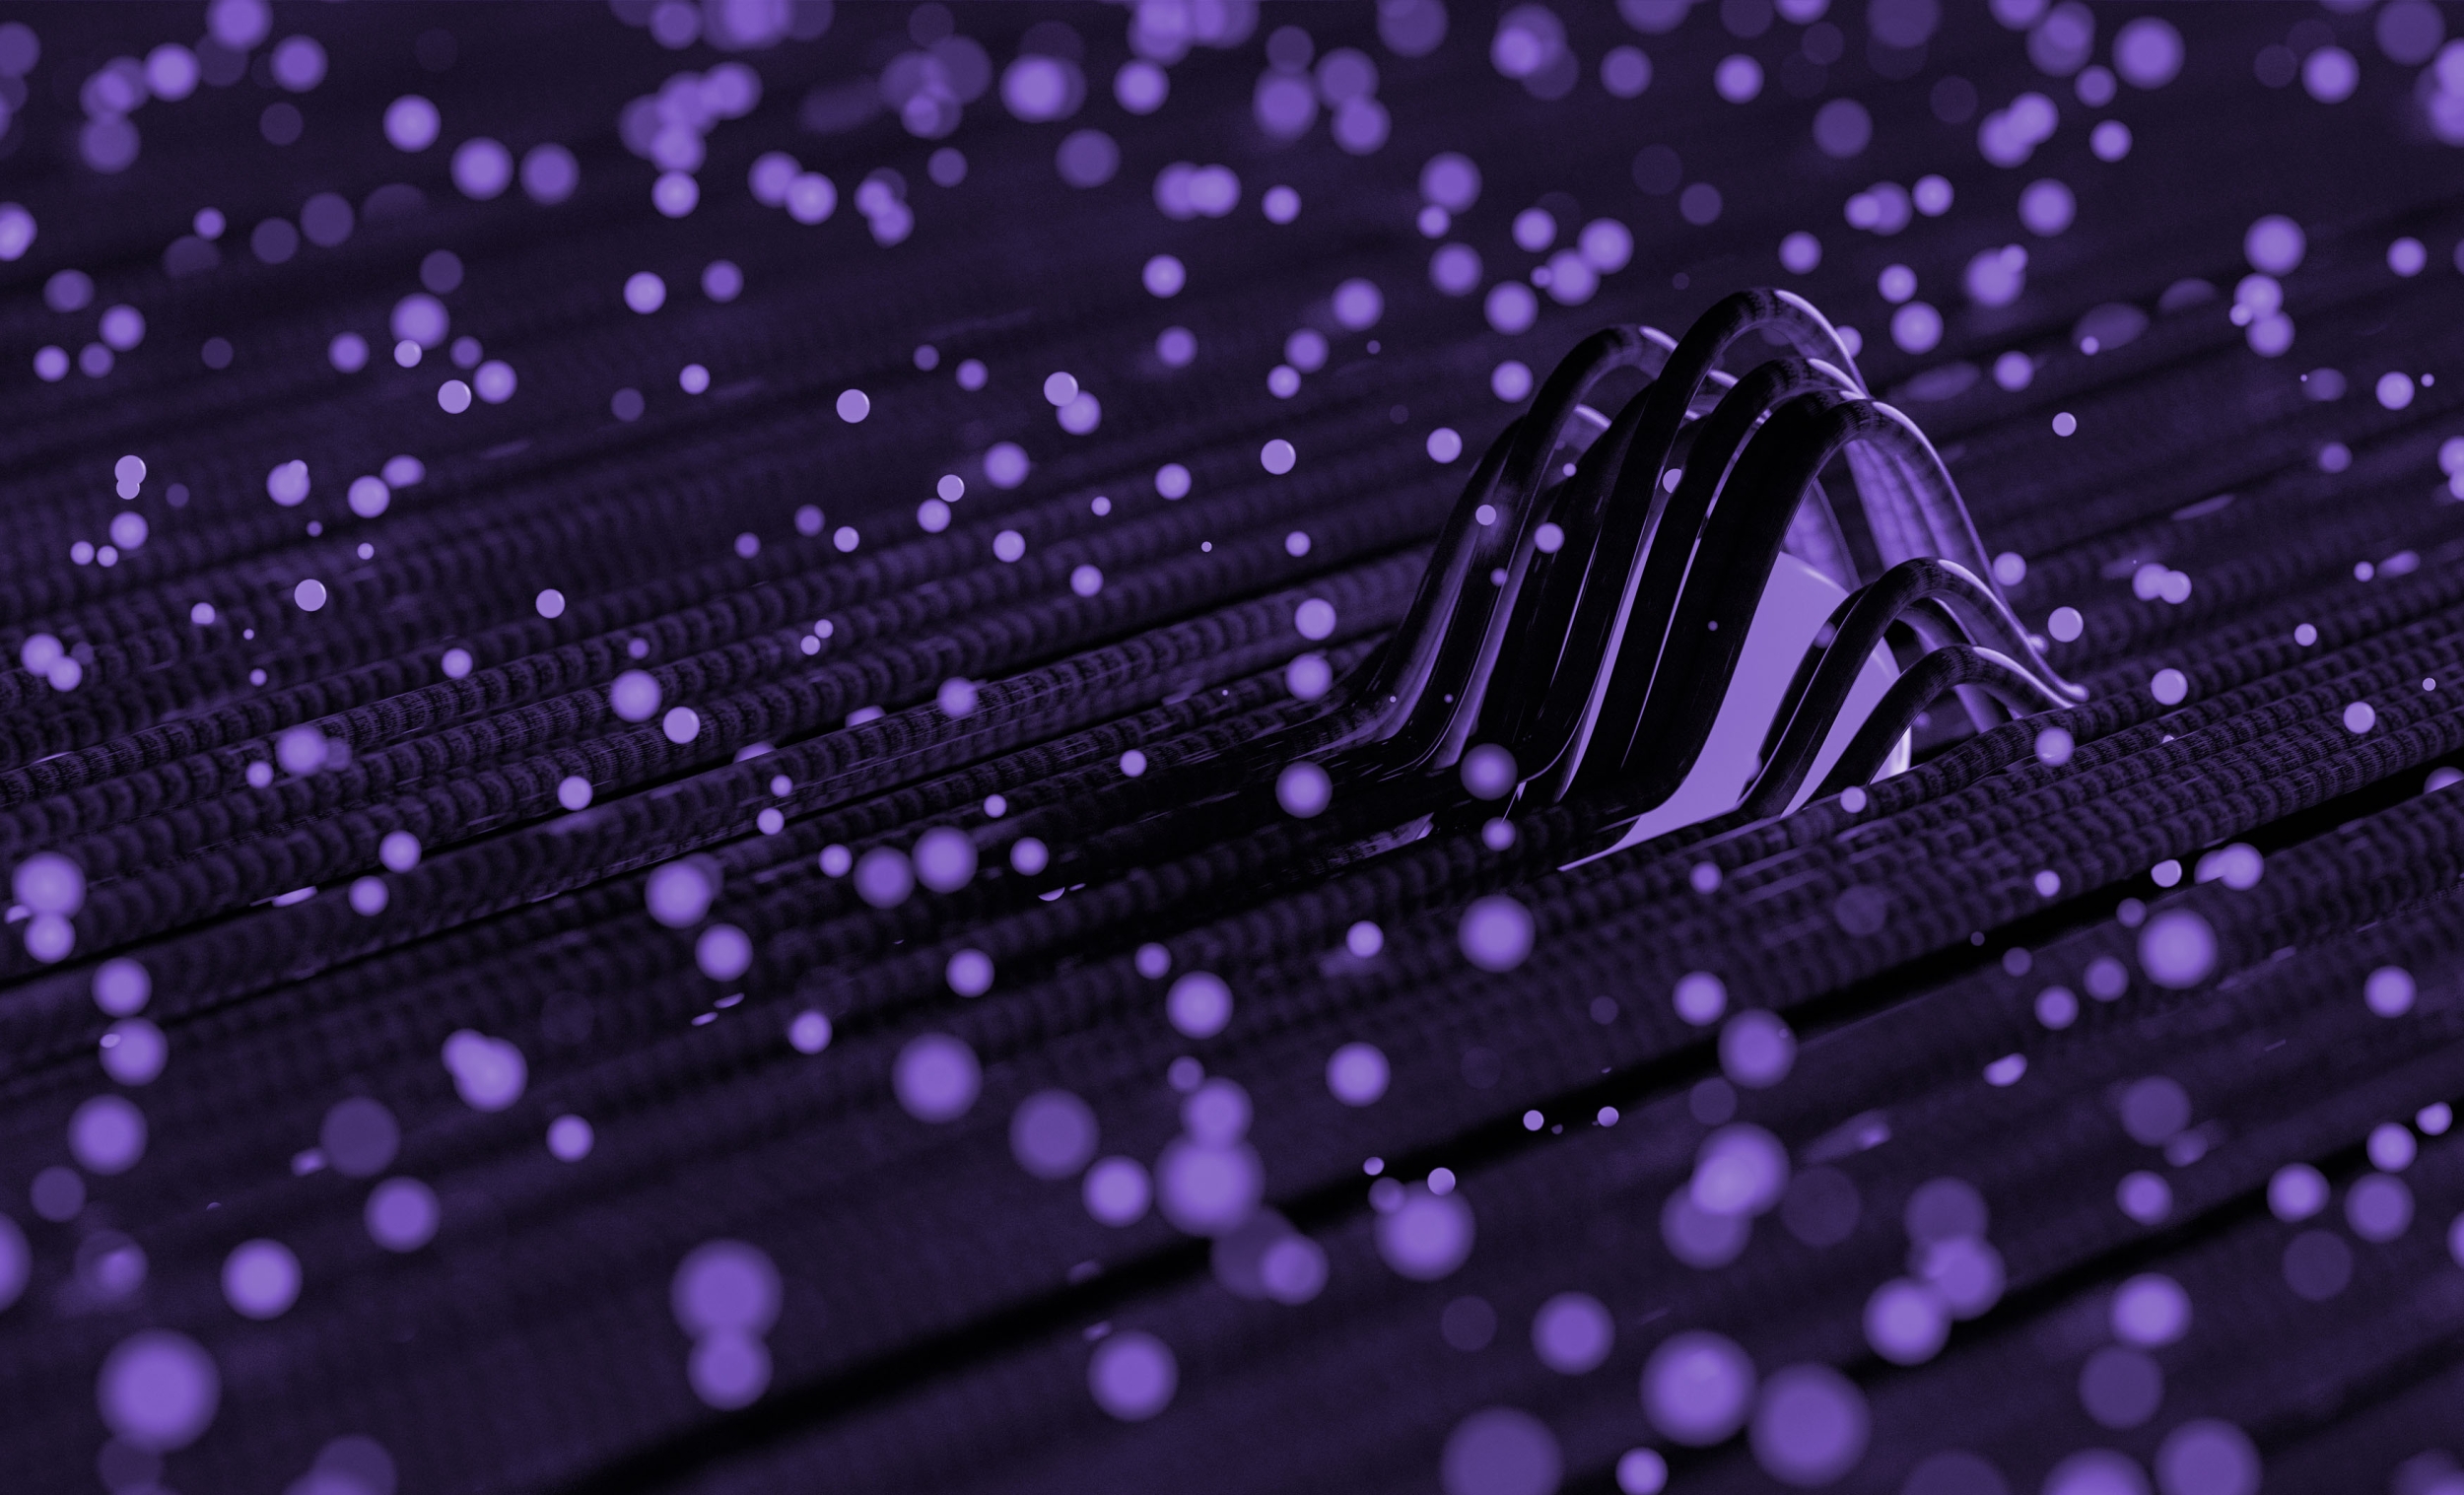 Abstract image in purple and black representing data and metrics.